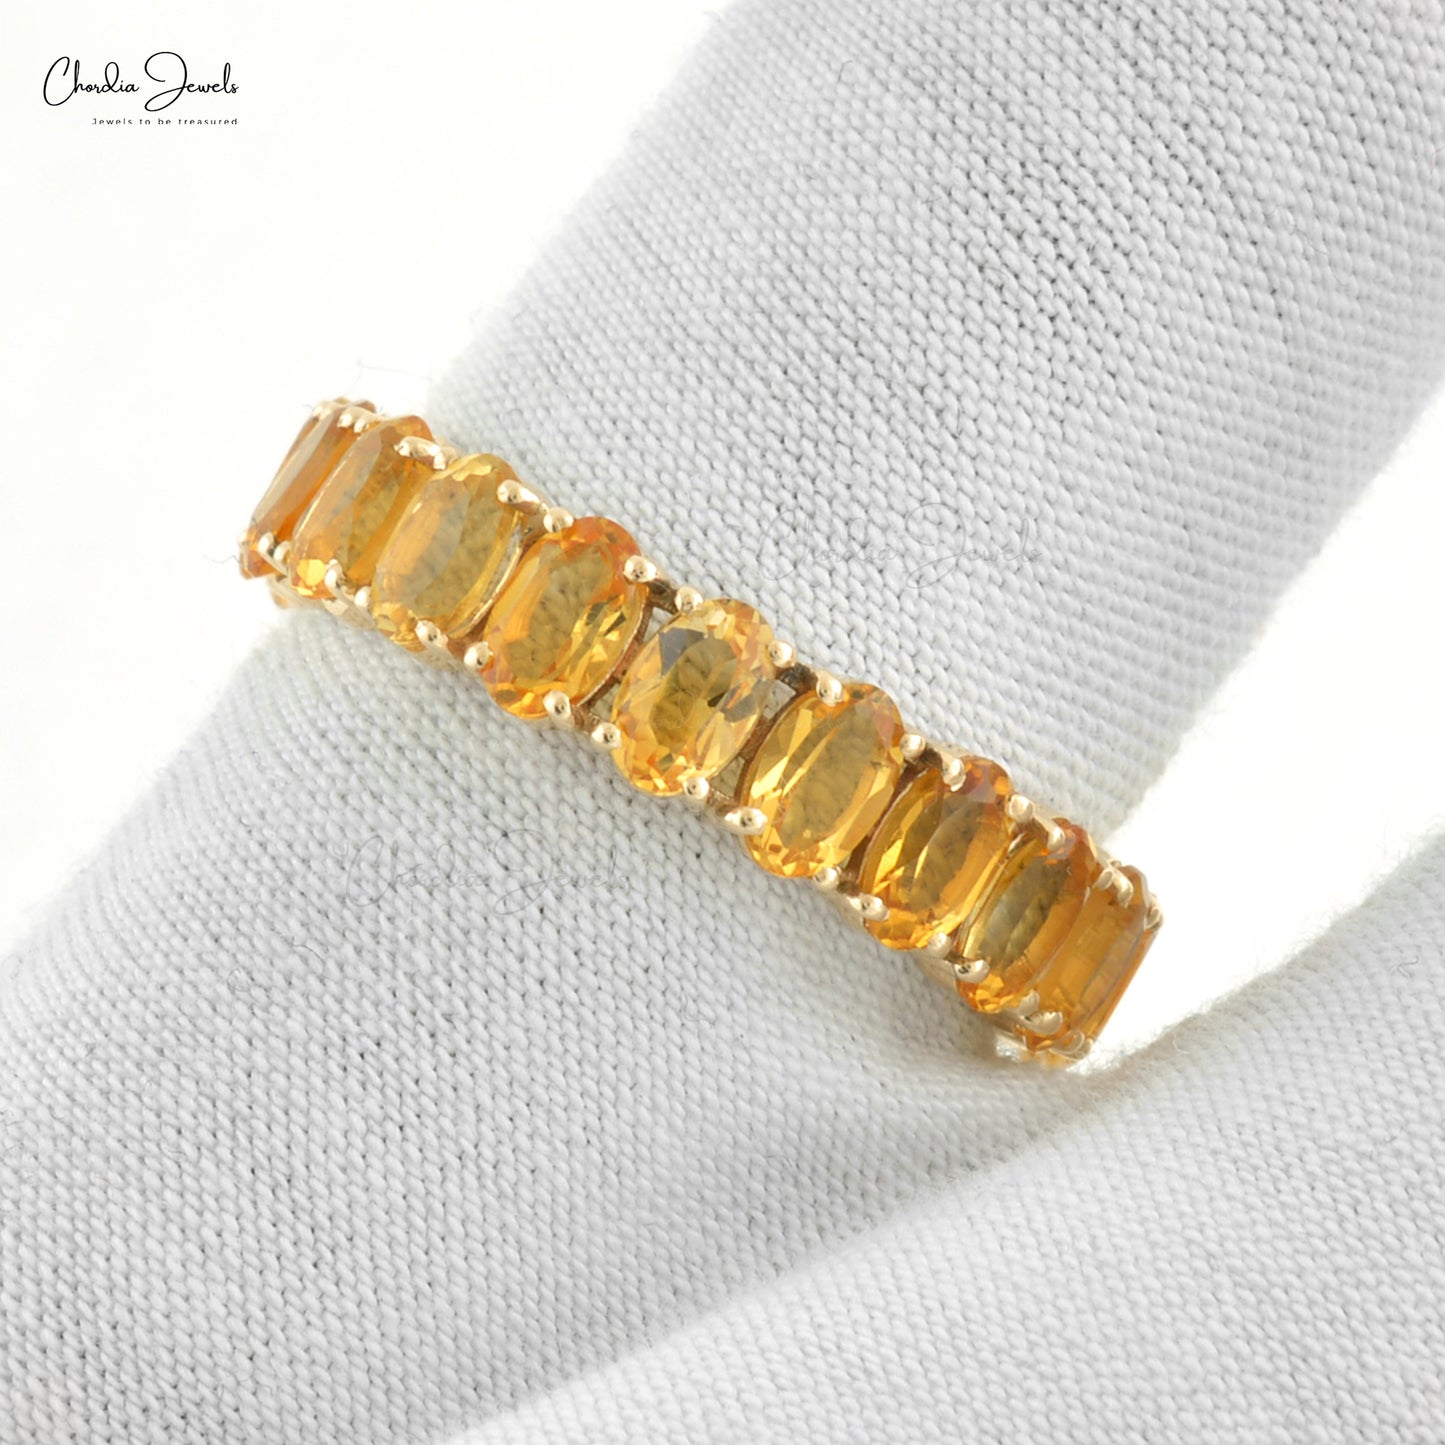 Load image into Gallery viewer, Natural 5X3mm Oval Cut Citrine Full Eternity Band Ring For Woman, 4.6 Carat November Birthstone Gemstone Band in 14k Solid Yellow Gold
